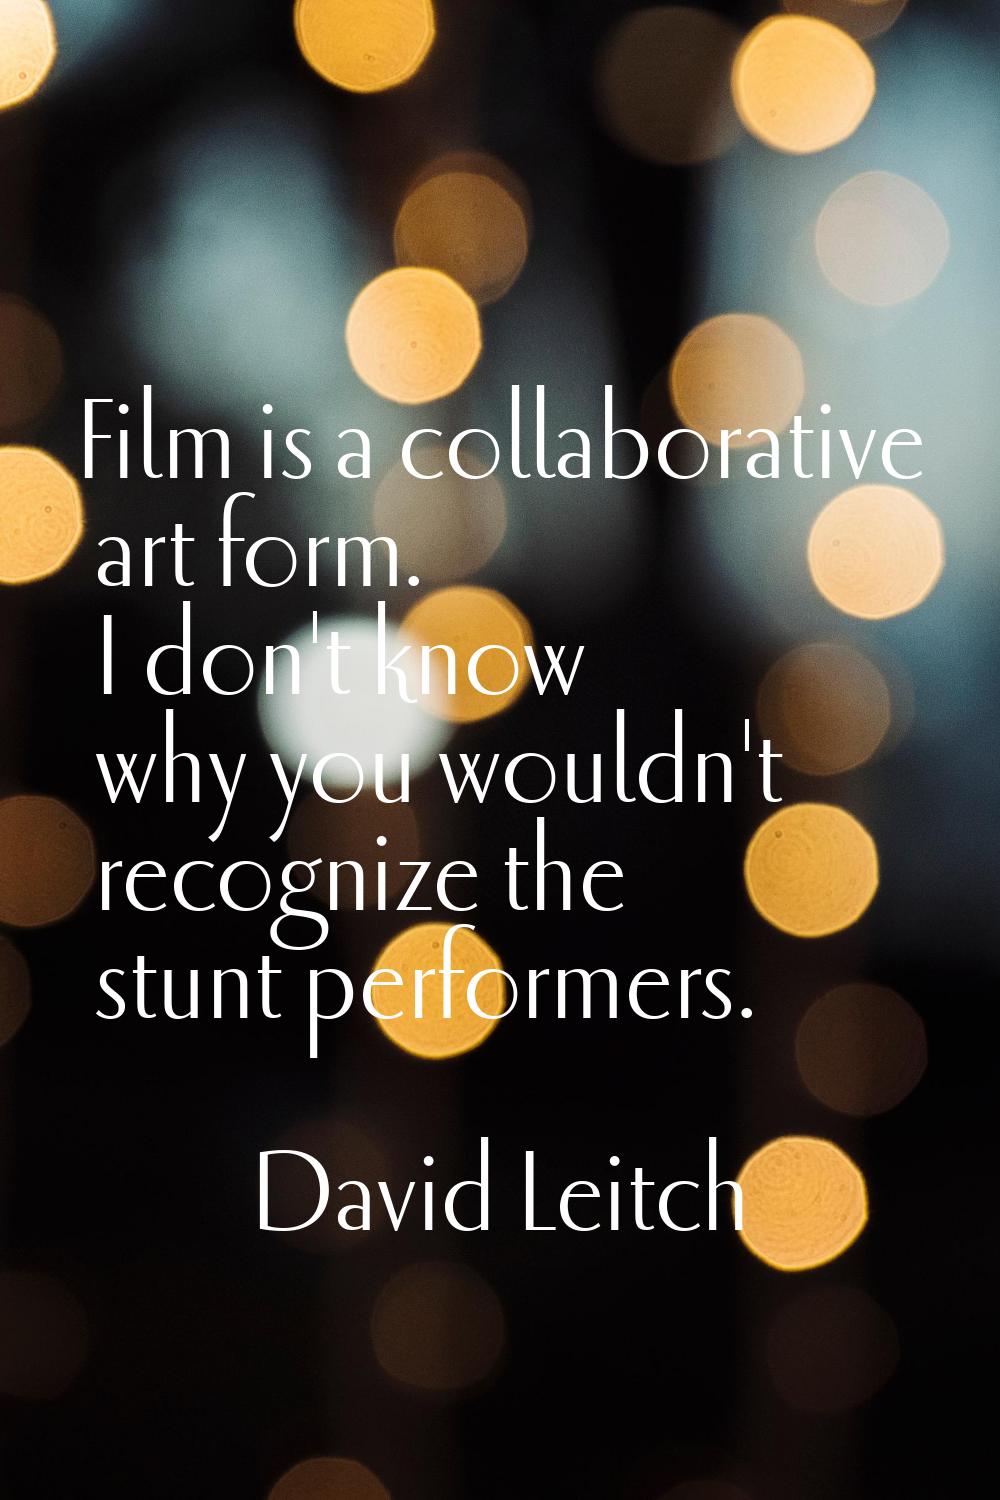 Film is a collaborative art form. I don't know why you wouldn't recognize the stunt performers.